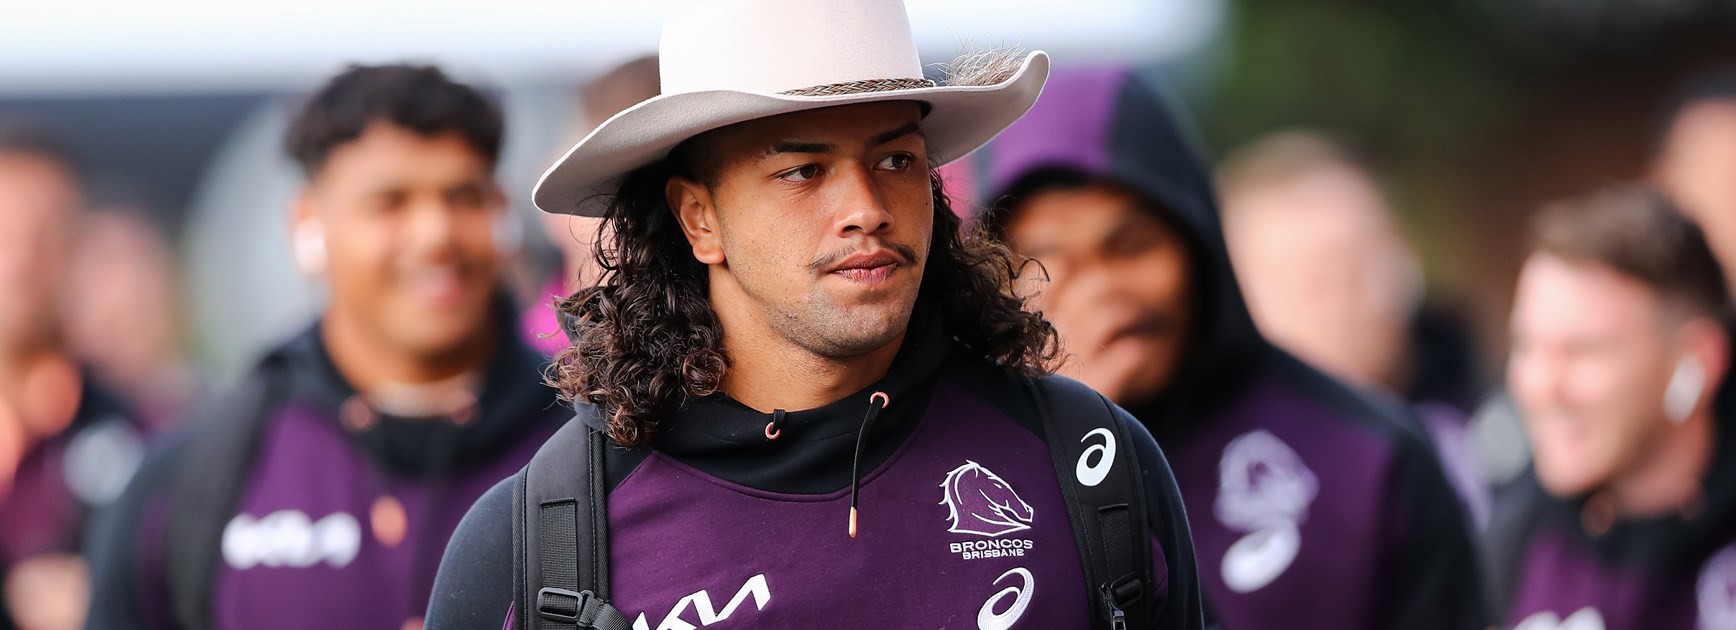 Sonny days ahead for rising Broncos talent Willison